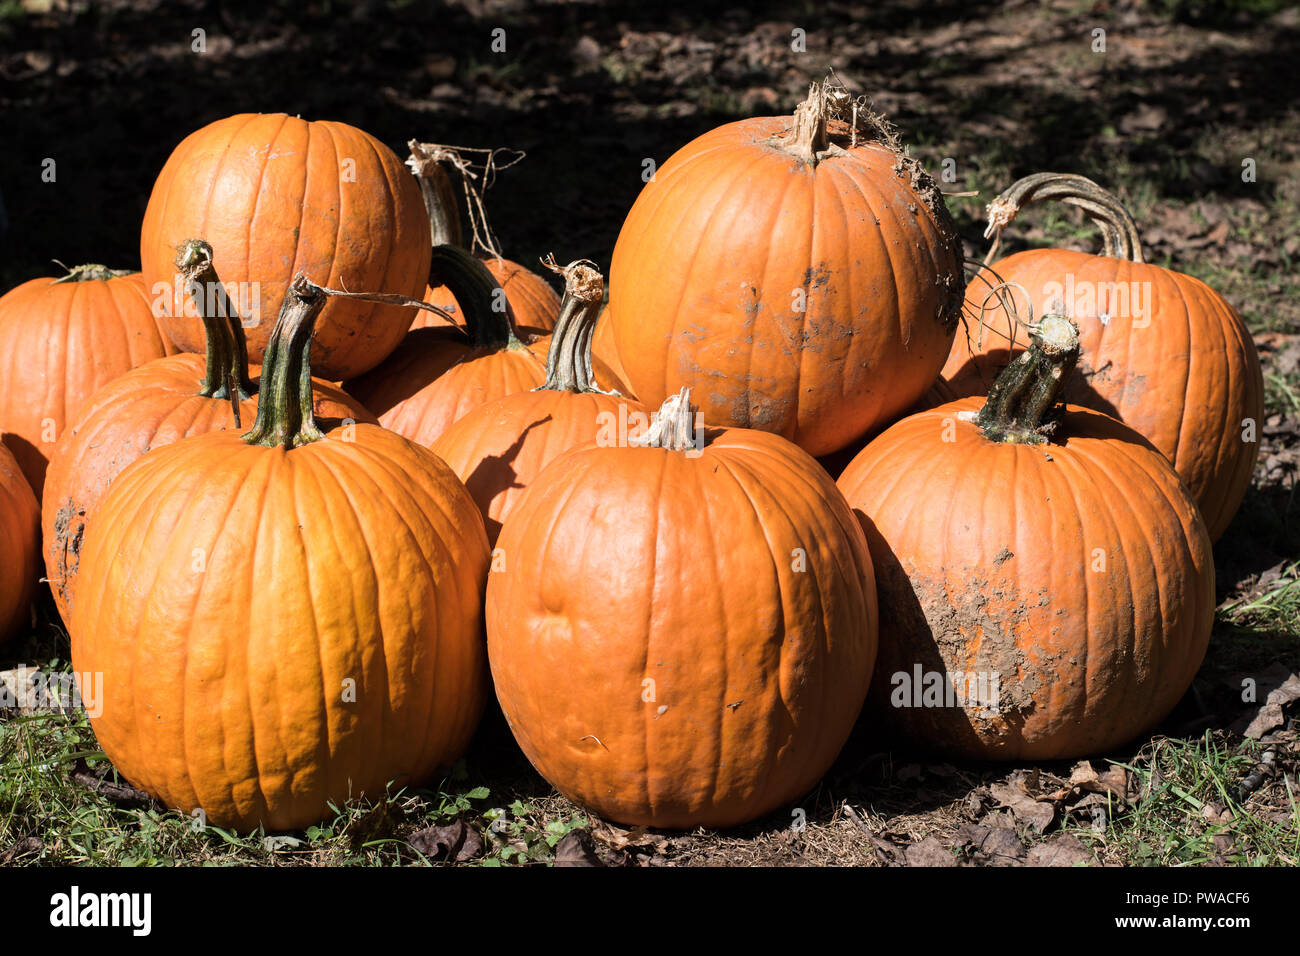 Fall festival pumpkins outside ready for family fun carving Stock Photo